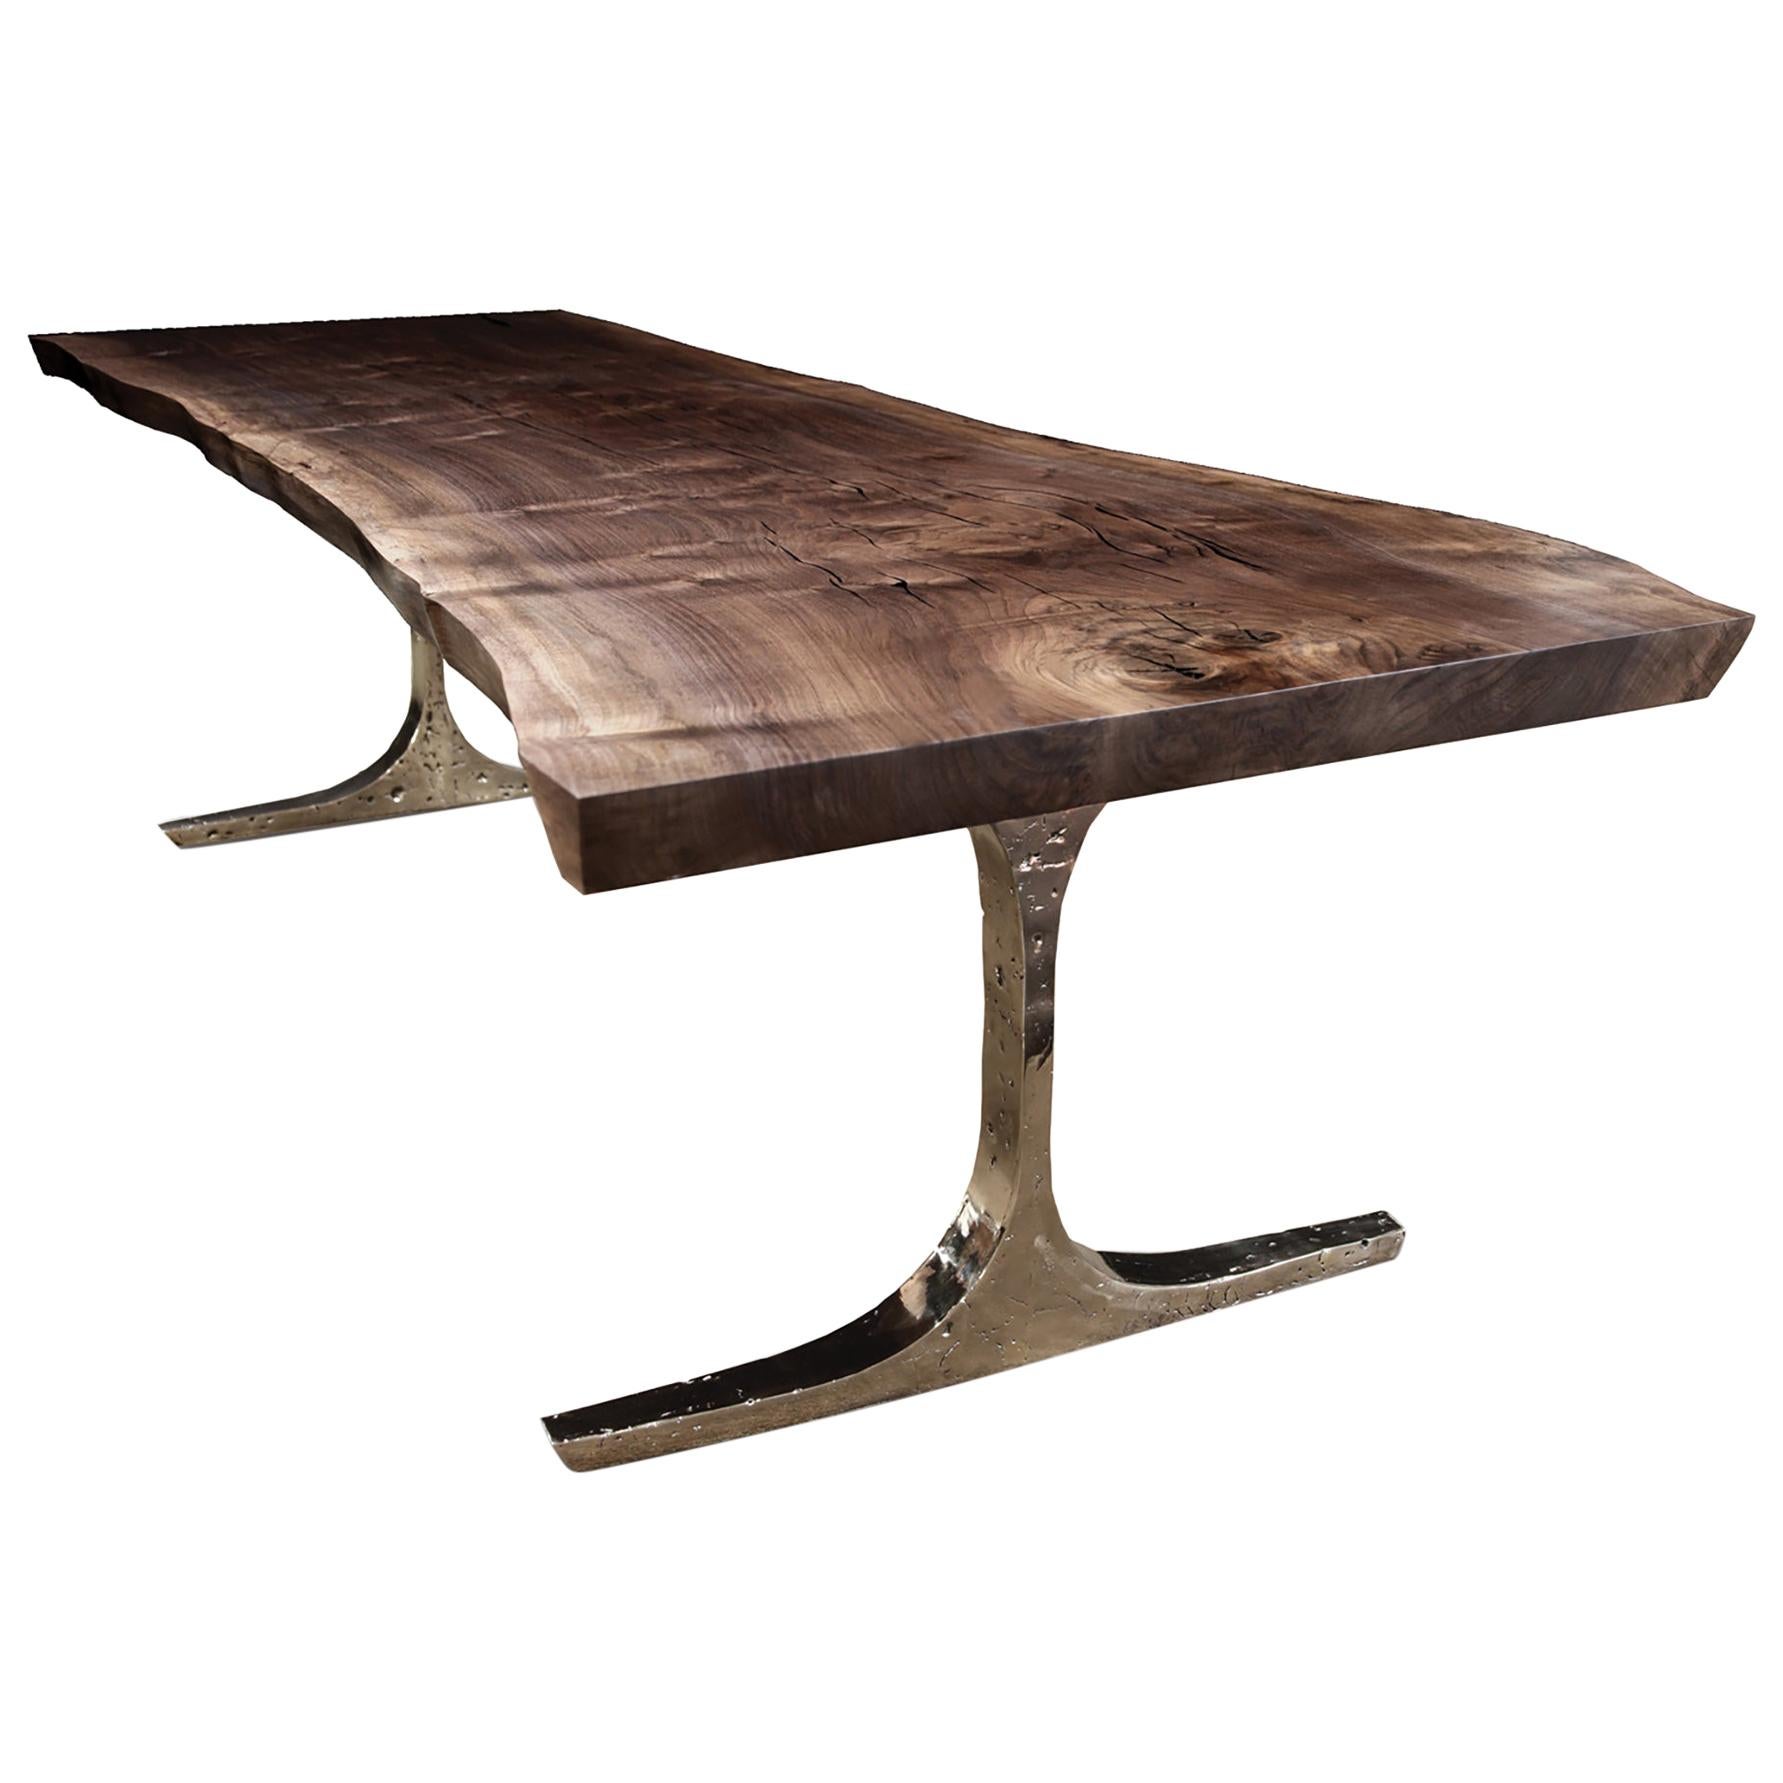 Knight Base Dining Table:  Versatile Bronze Base Dining Table with Walnut Top